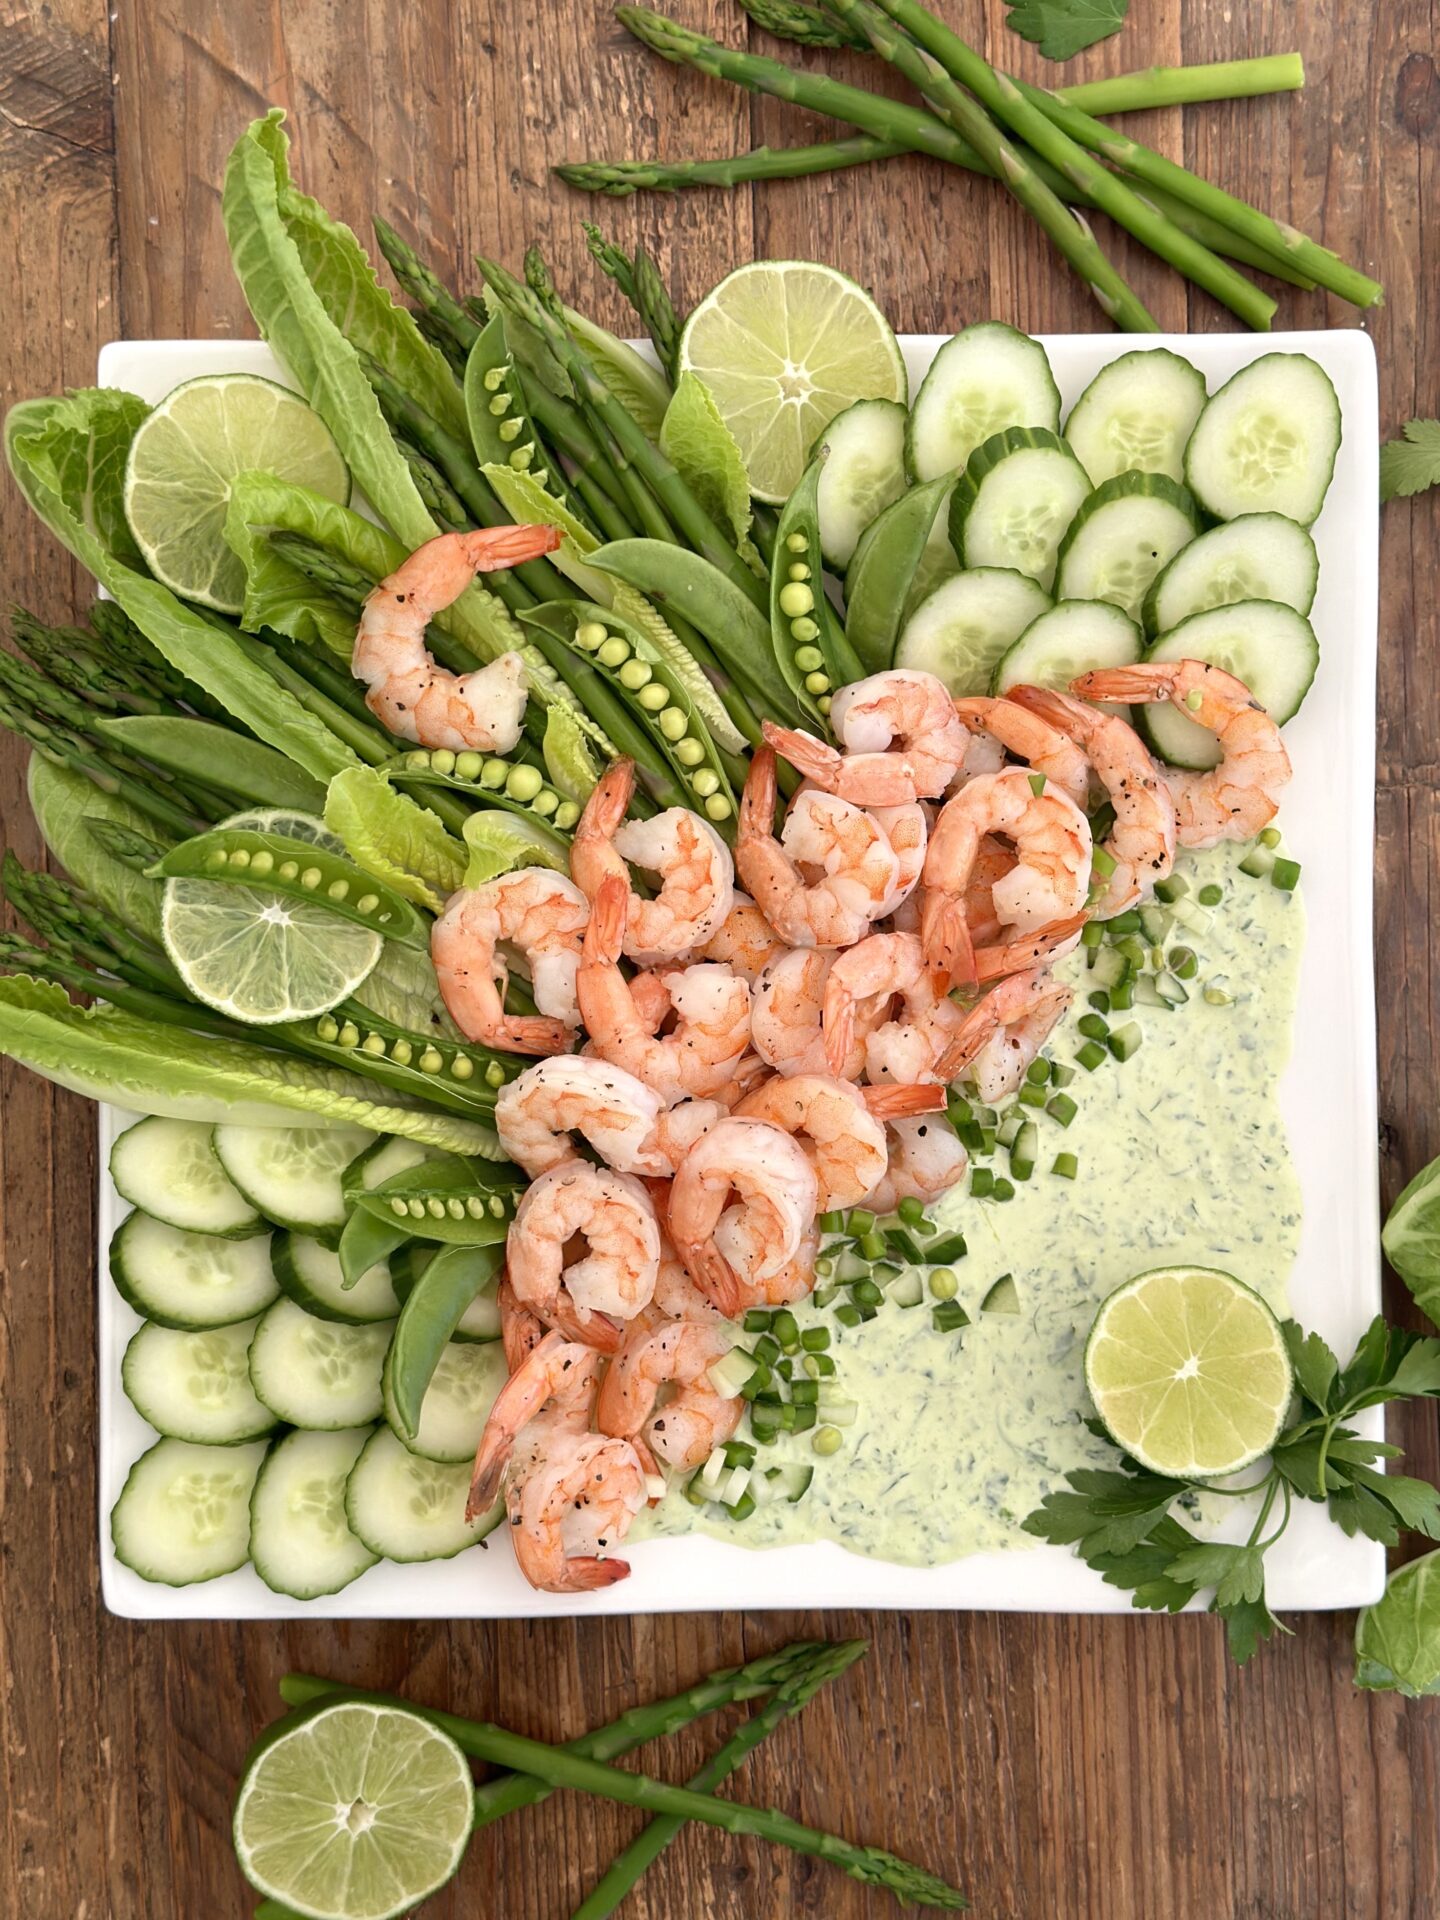 A beautiful platter of roasted shrimp with asparagus, cucumber, snap peas and romain is seen from above garnished with fresh herbs and lime slices